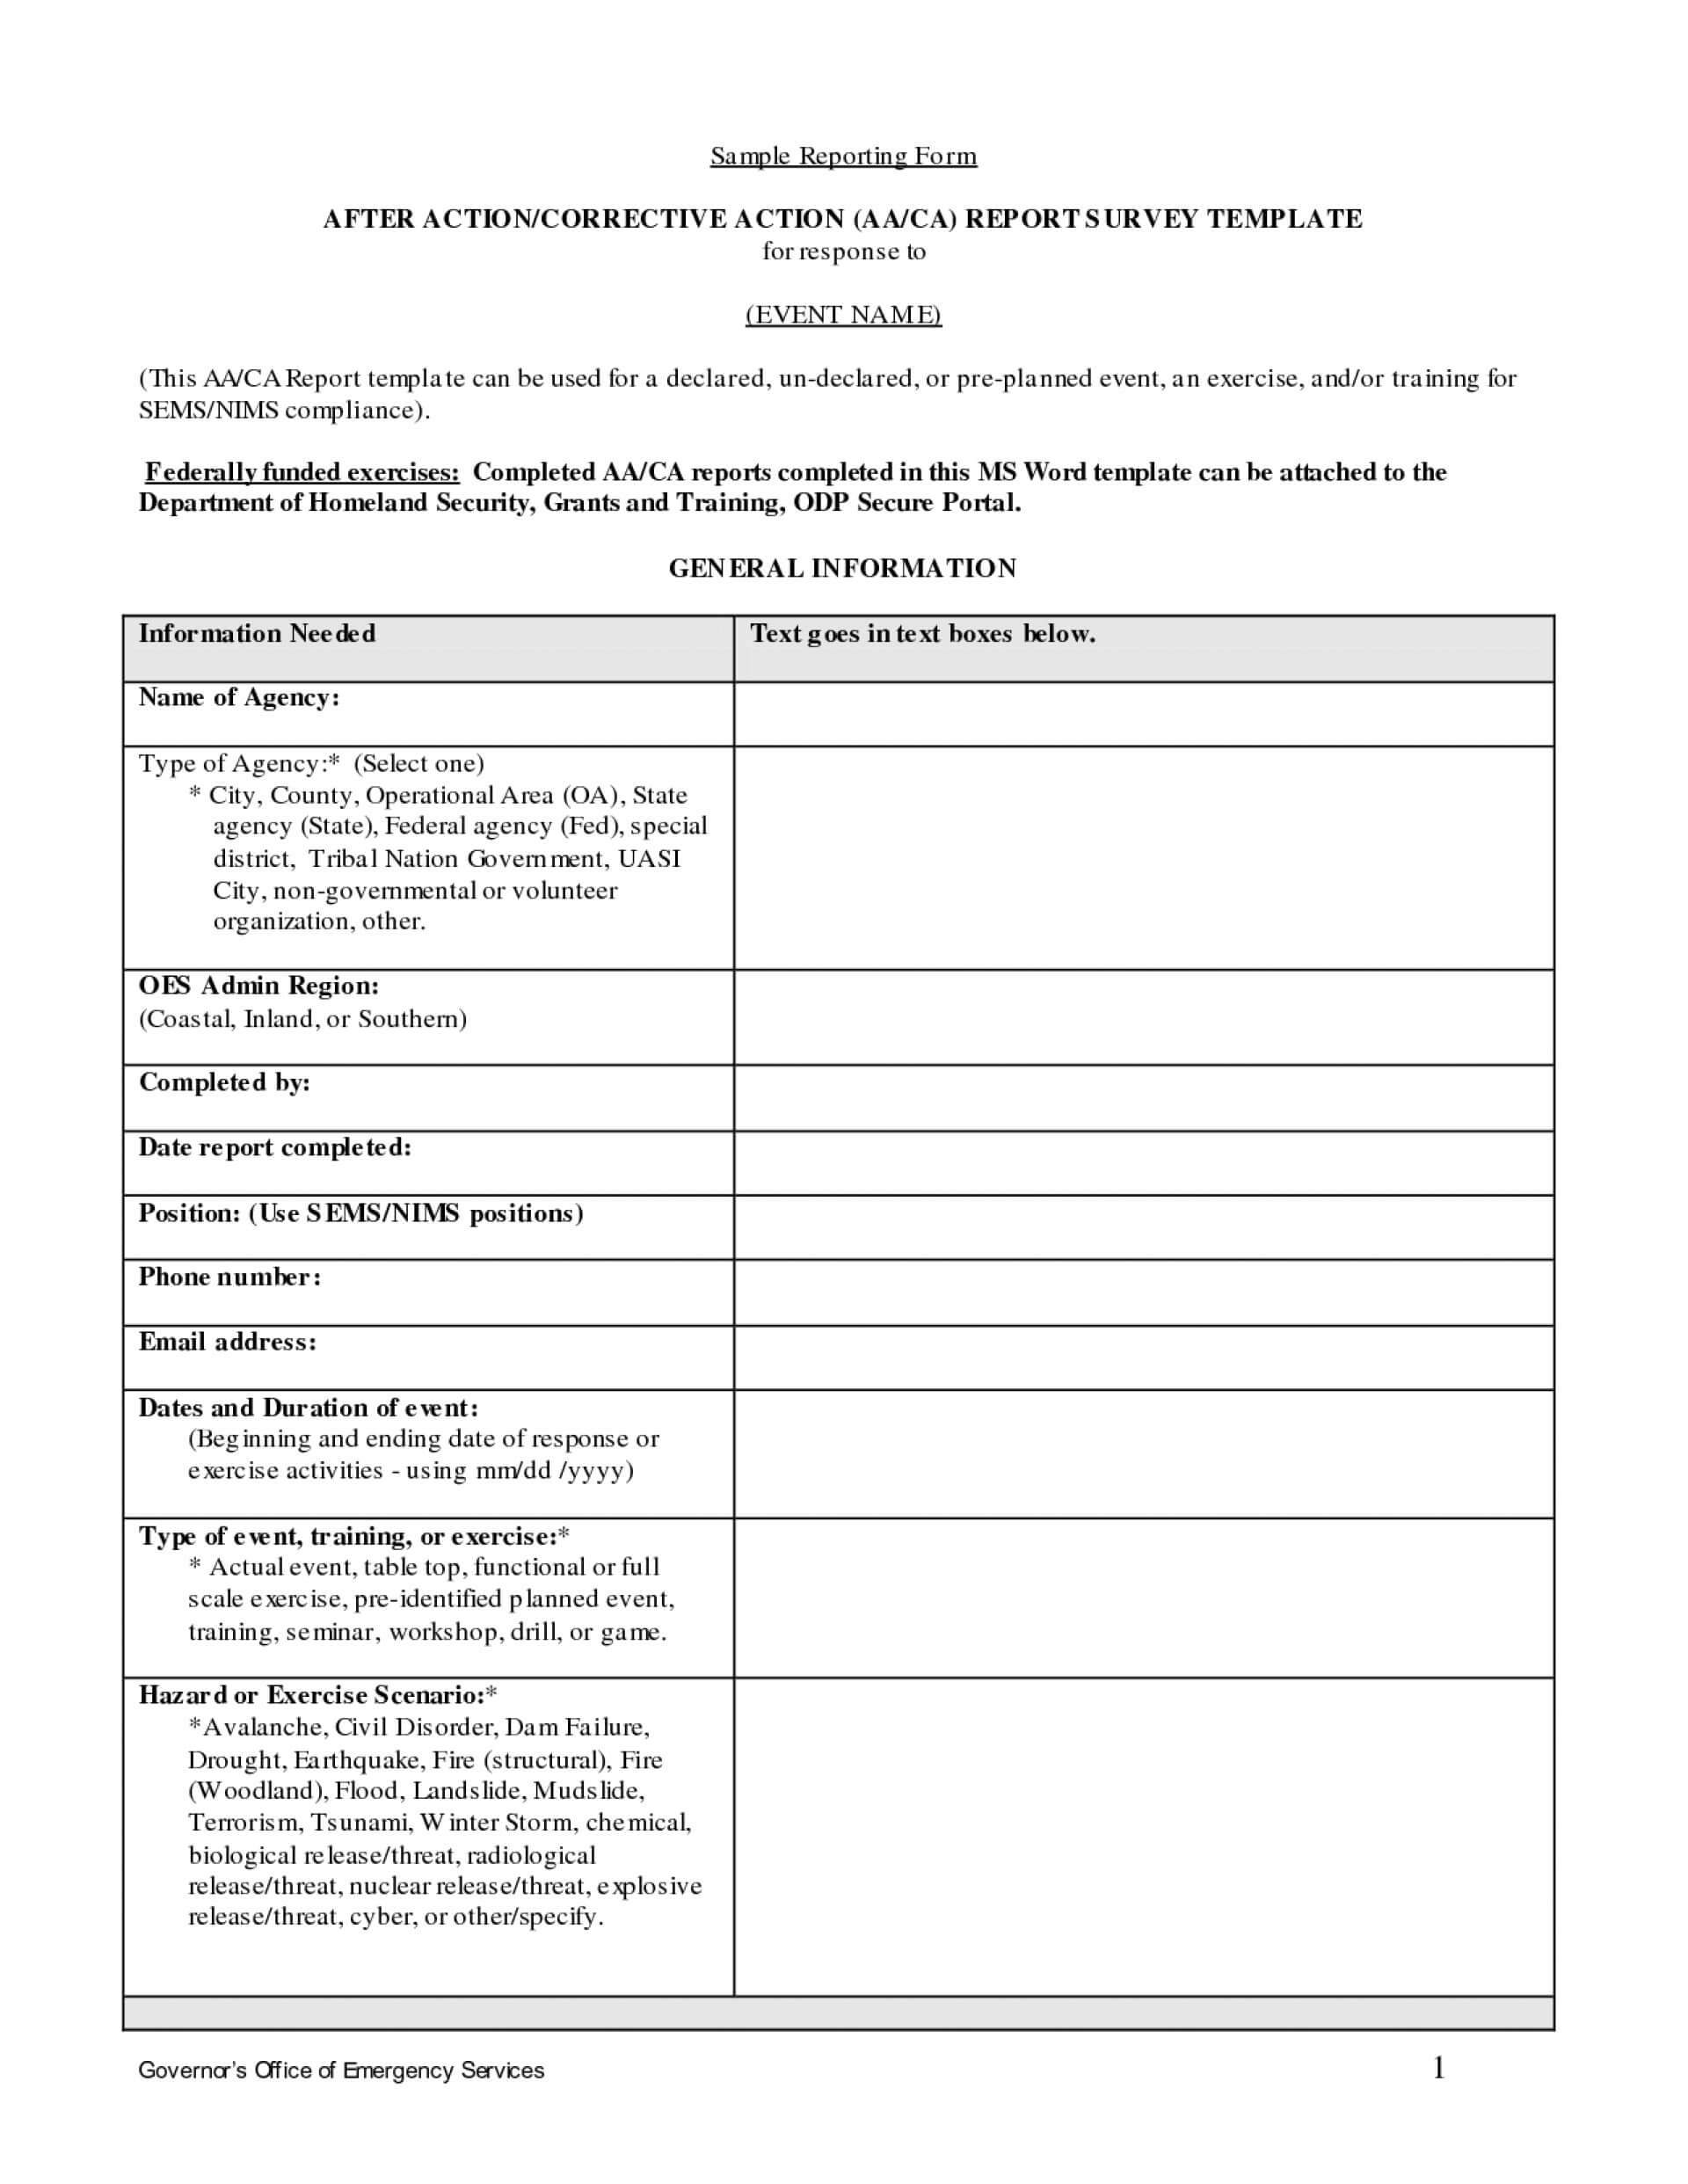 011 Post Conference Report Template Awesome Summary Ideas With After Event Report Template